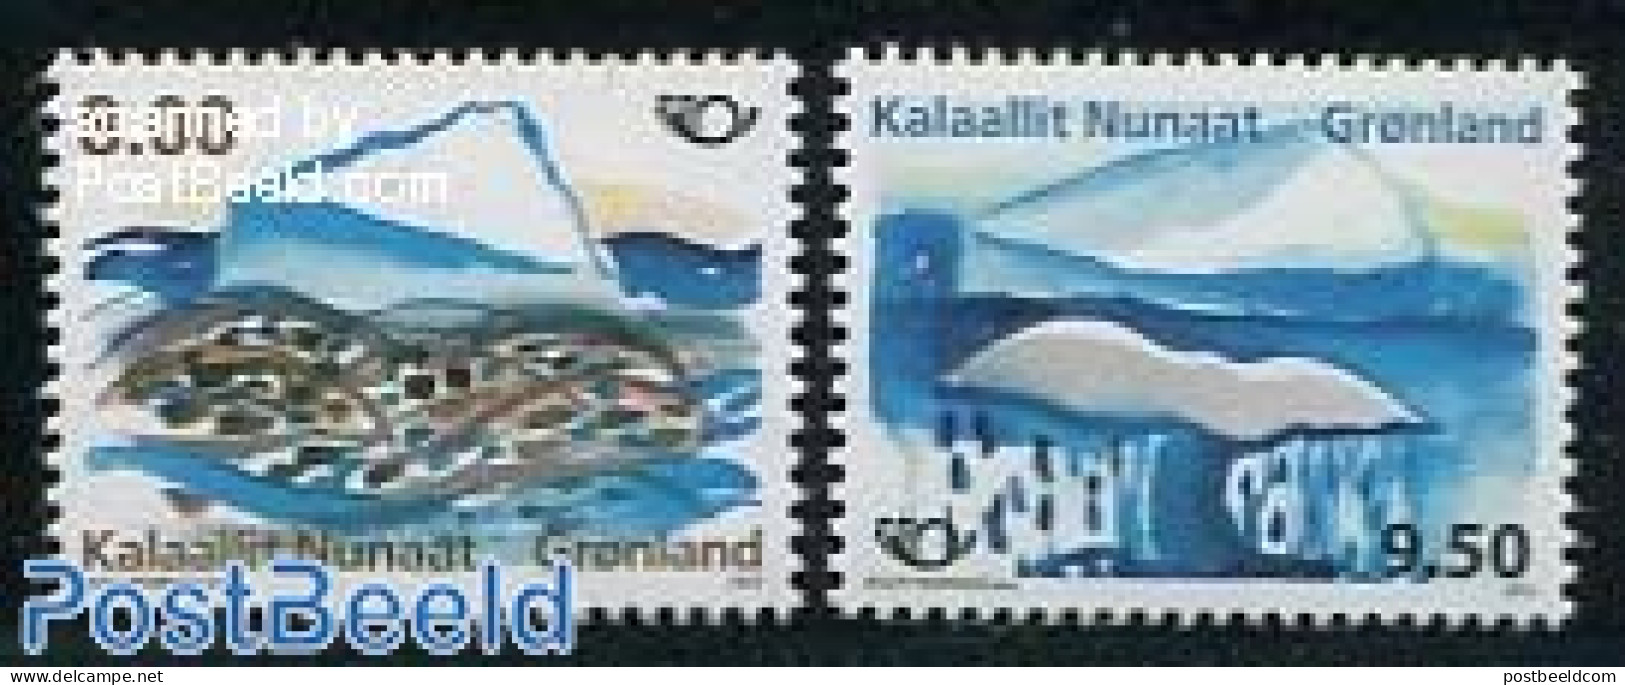 Greenland 2012 Norden 2v, Mint NH, History - Nature - Europa Hang-on Issues - Sea Mammals - Ungebraucht